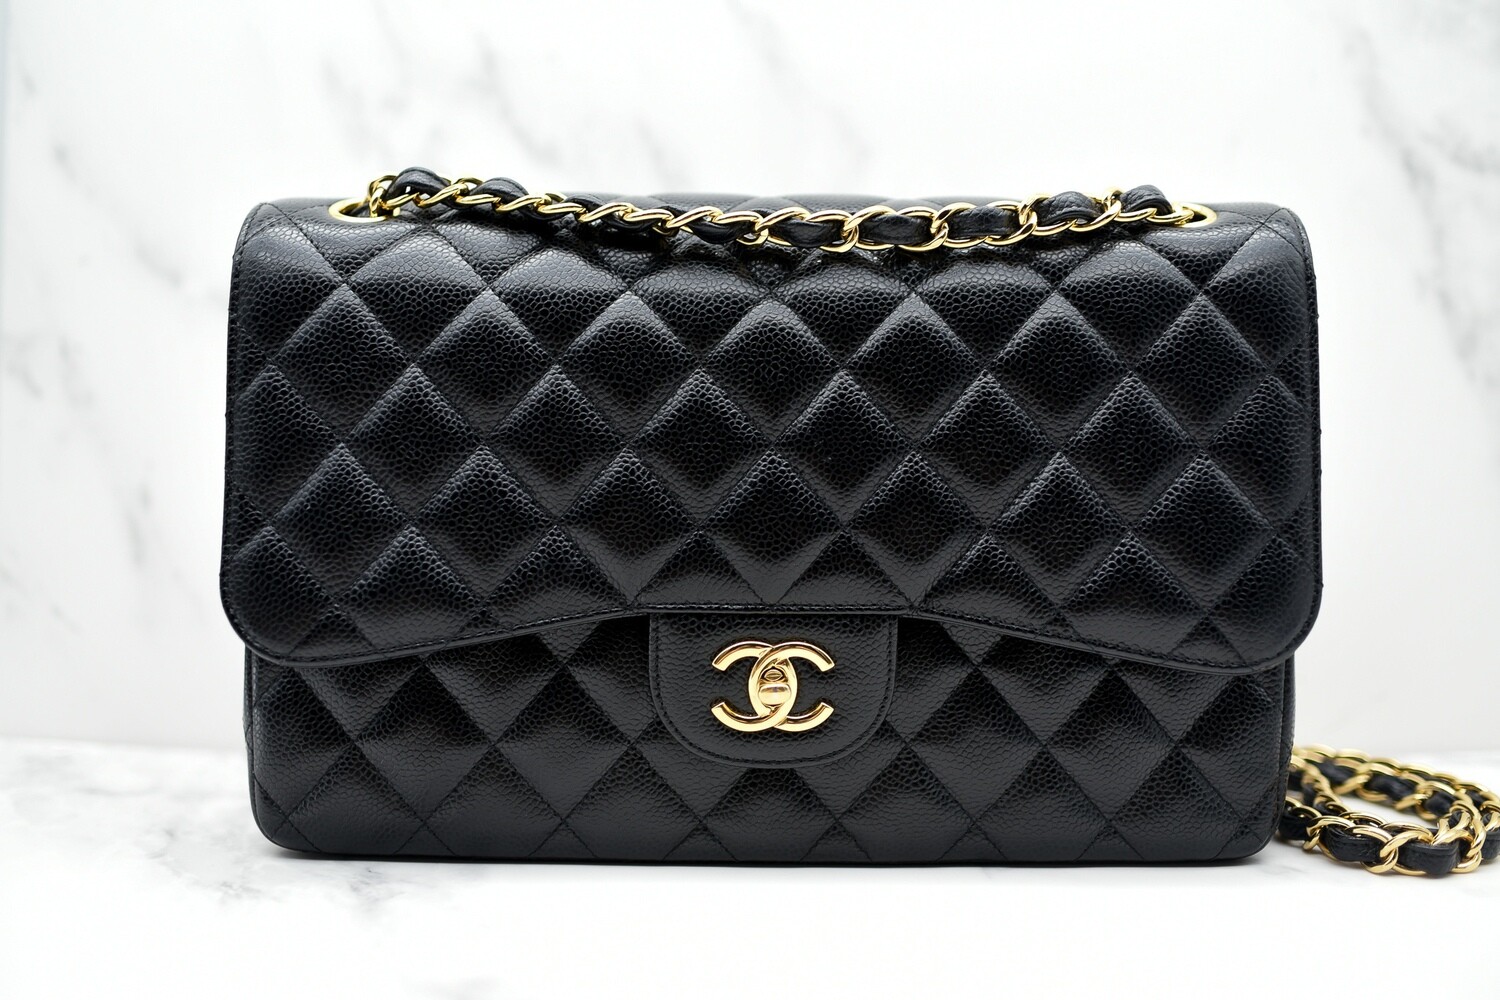 Chanel Classic Jumbo Double Flap, Black Caviar Leather, Gold Hardware,  Preowned Condition in Black Dustbag and Box GA003